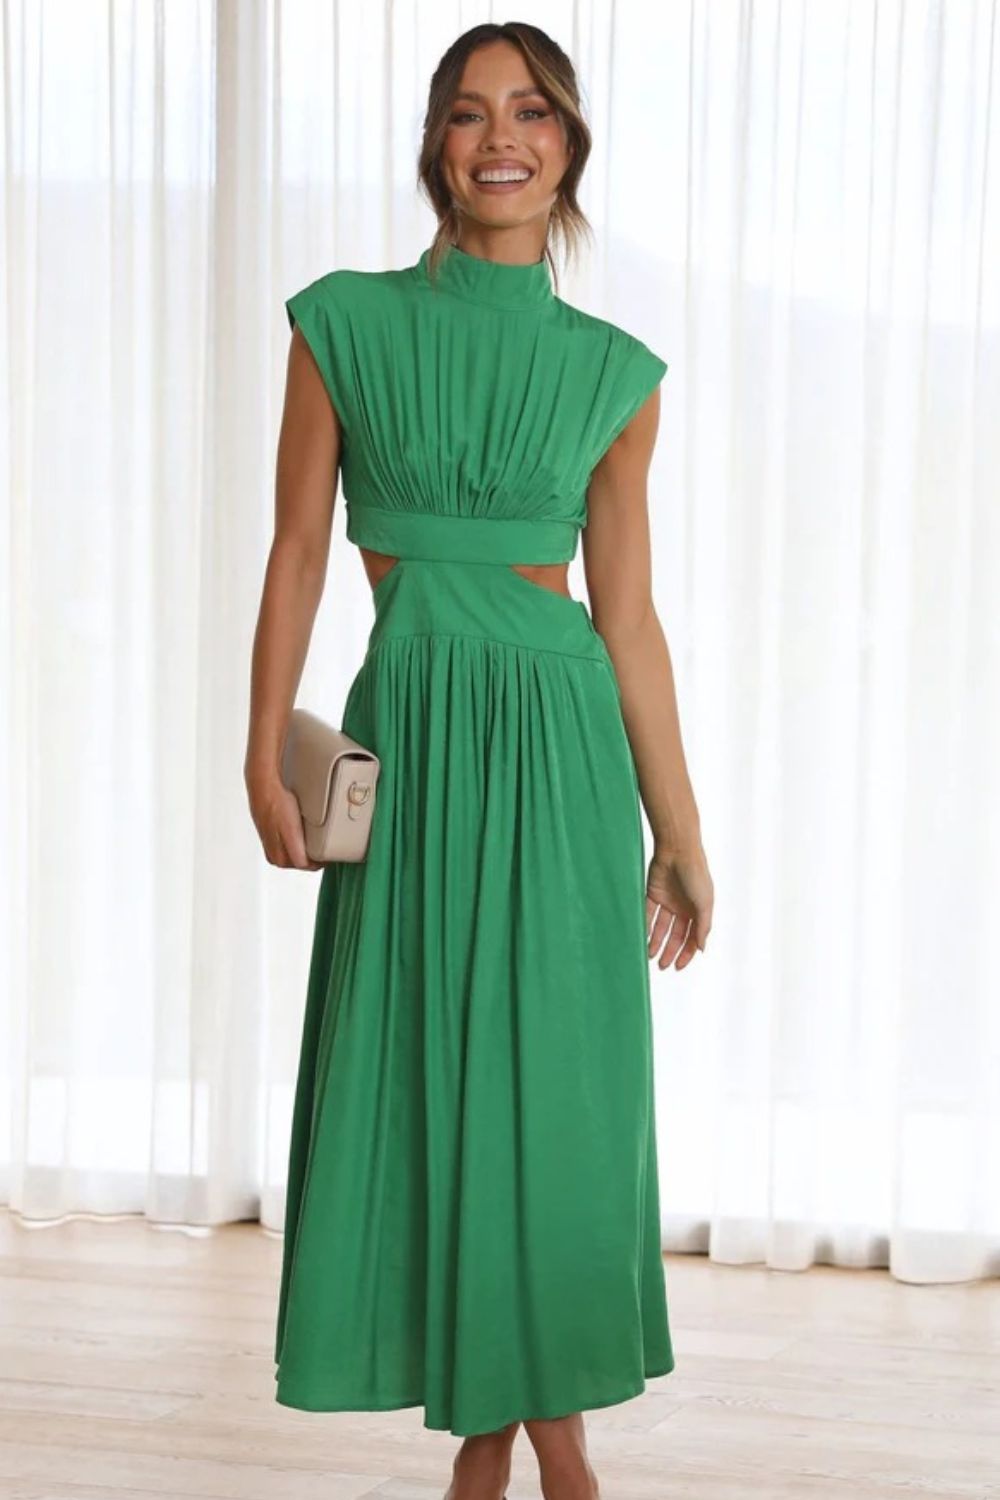 Cutout Mock Neck Sleeveless Ruched Dress - Cocktail Dresses - FITGGINS